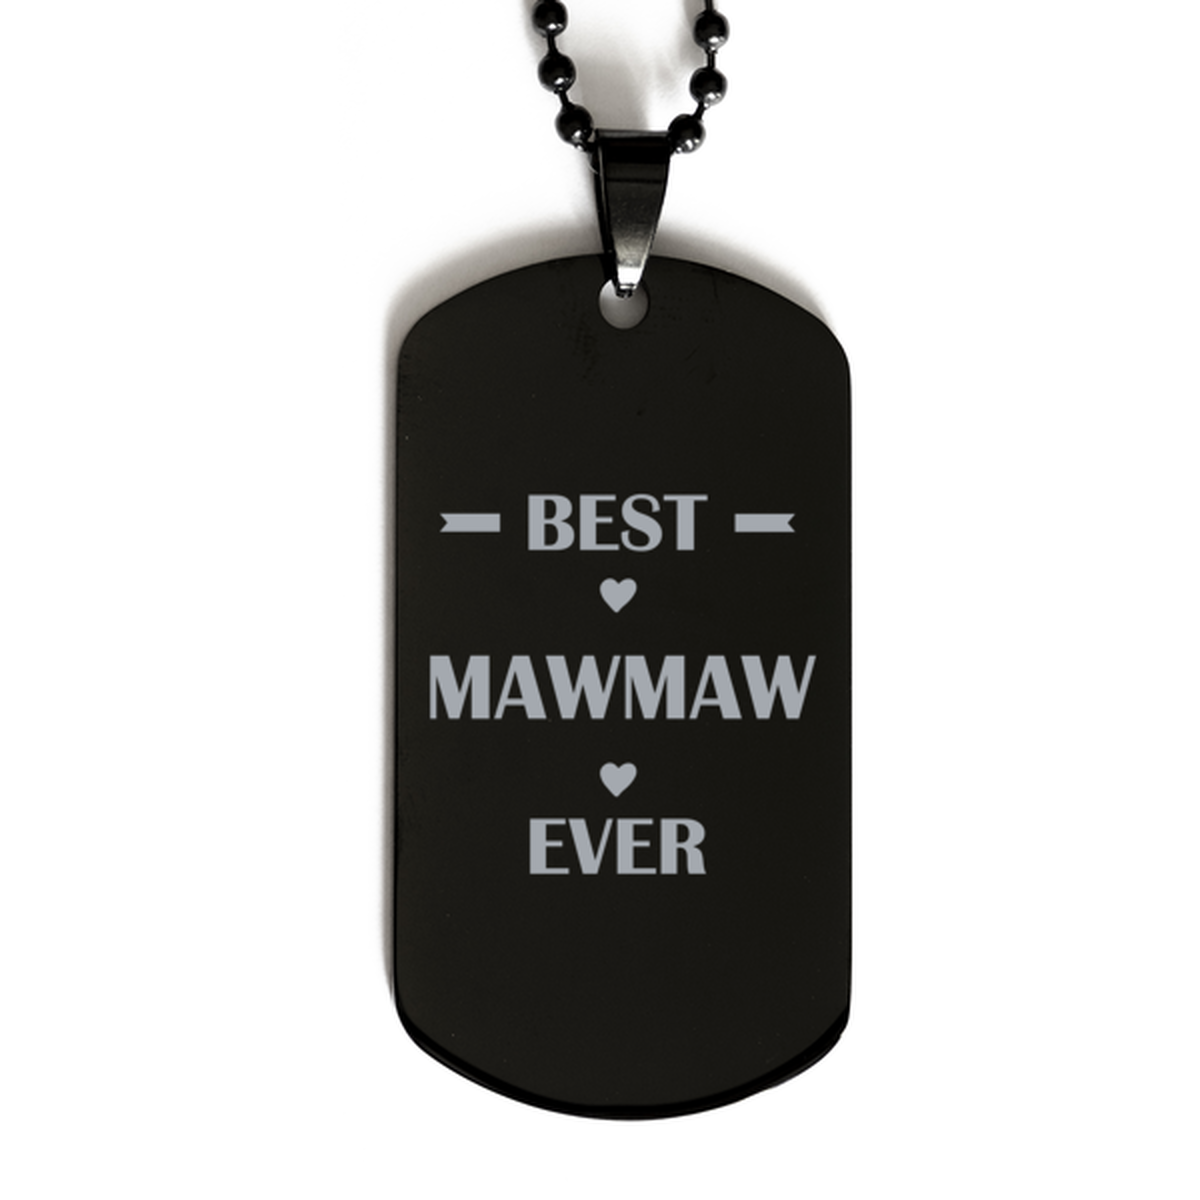 Best Mawmaw Ever Mawmaw Gifts, Funny Black Dog Tag For Mawmaw, Birthday Family Presents Engraved Necklace For Women